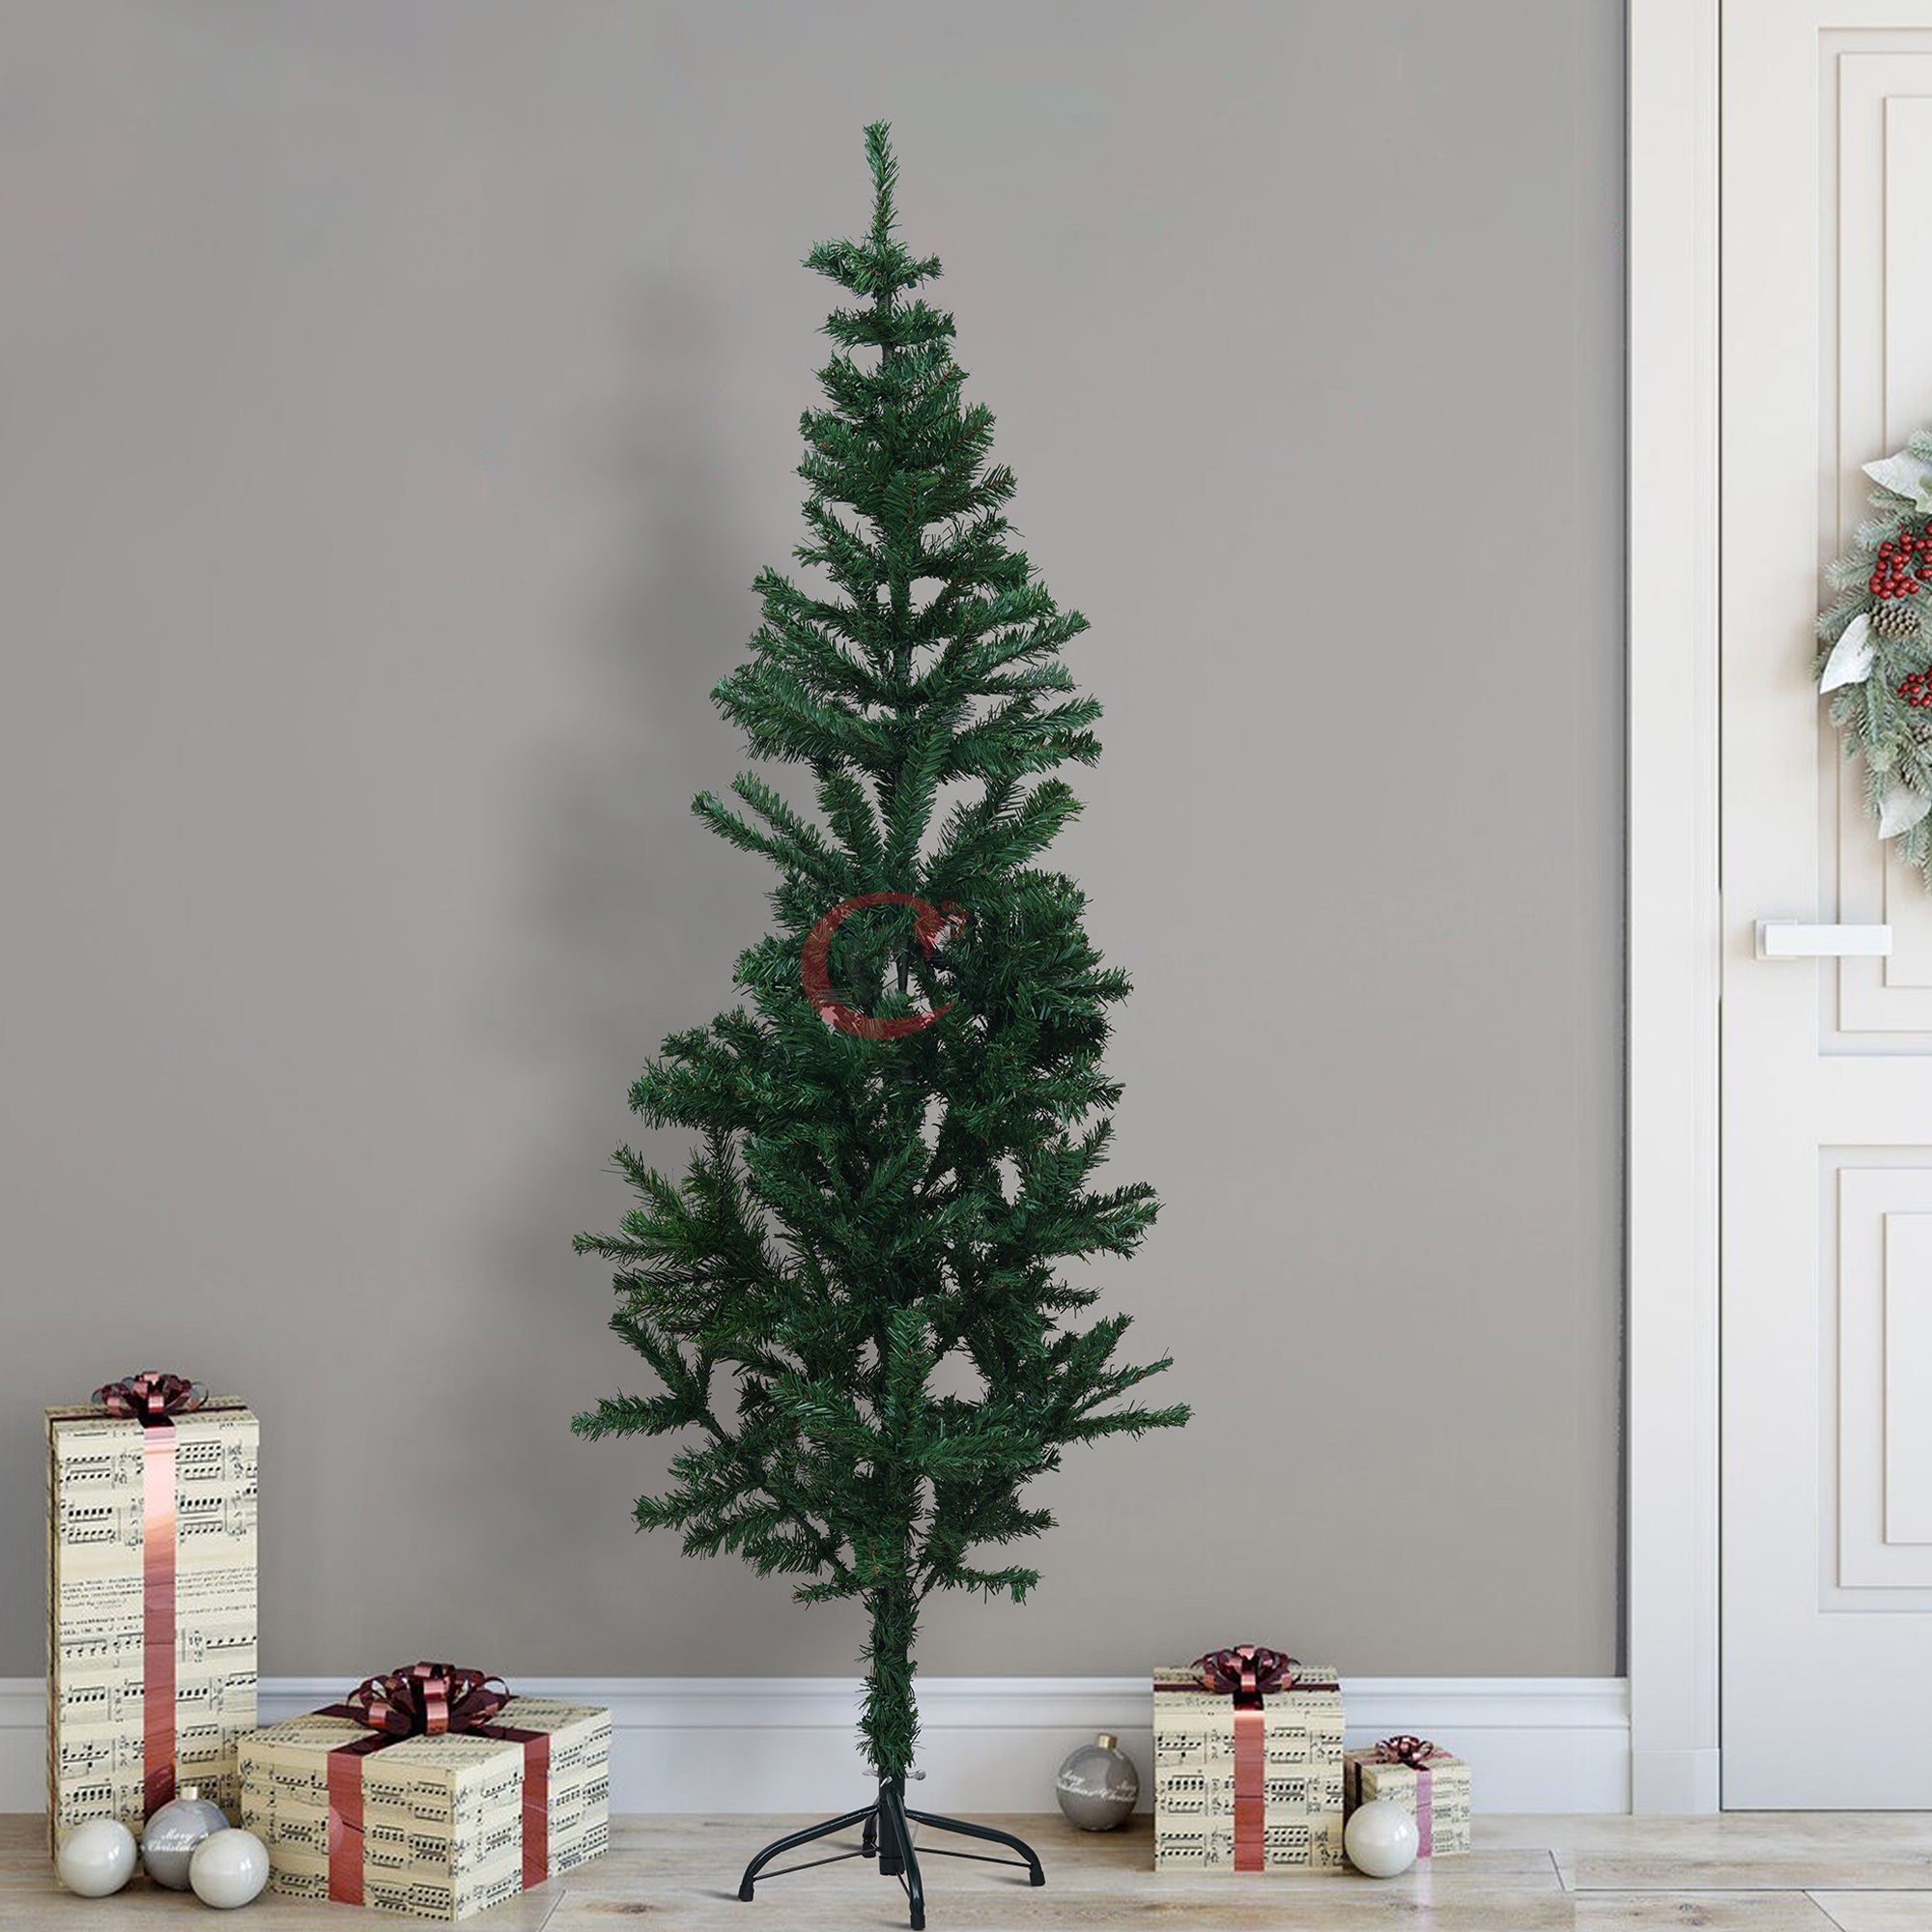 eCraftIndia 6 Feet Green Artificial Christmas Tree Xmas Pine Tree with Metal Stand - Xmas Tree for Indoor, Outdoor, Home, Living Room, Office, Church Decor - Merry Christmas Decoration Item